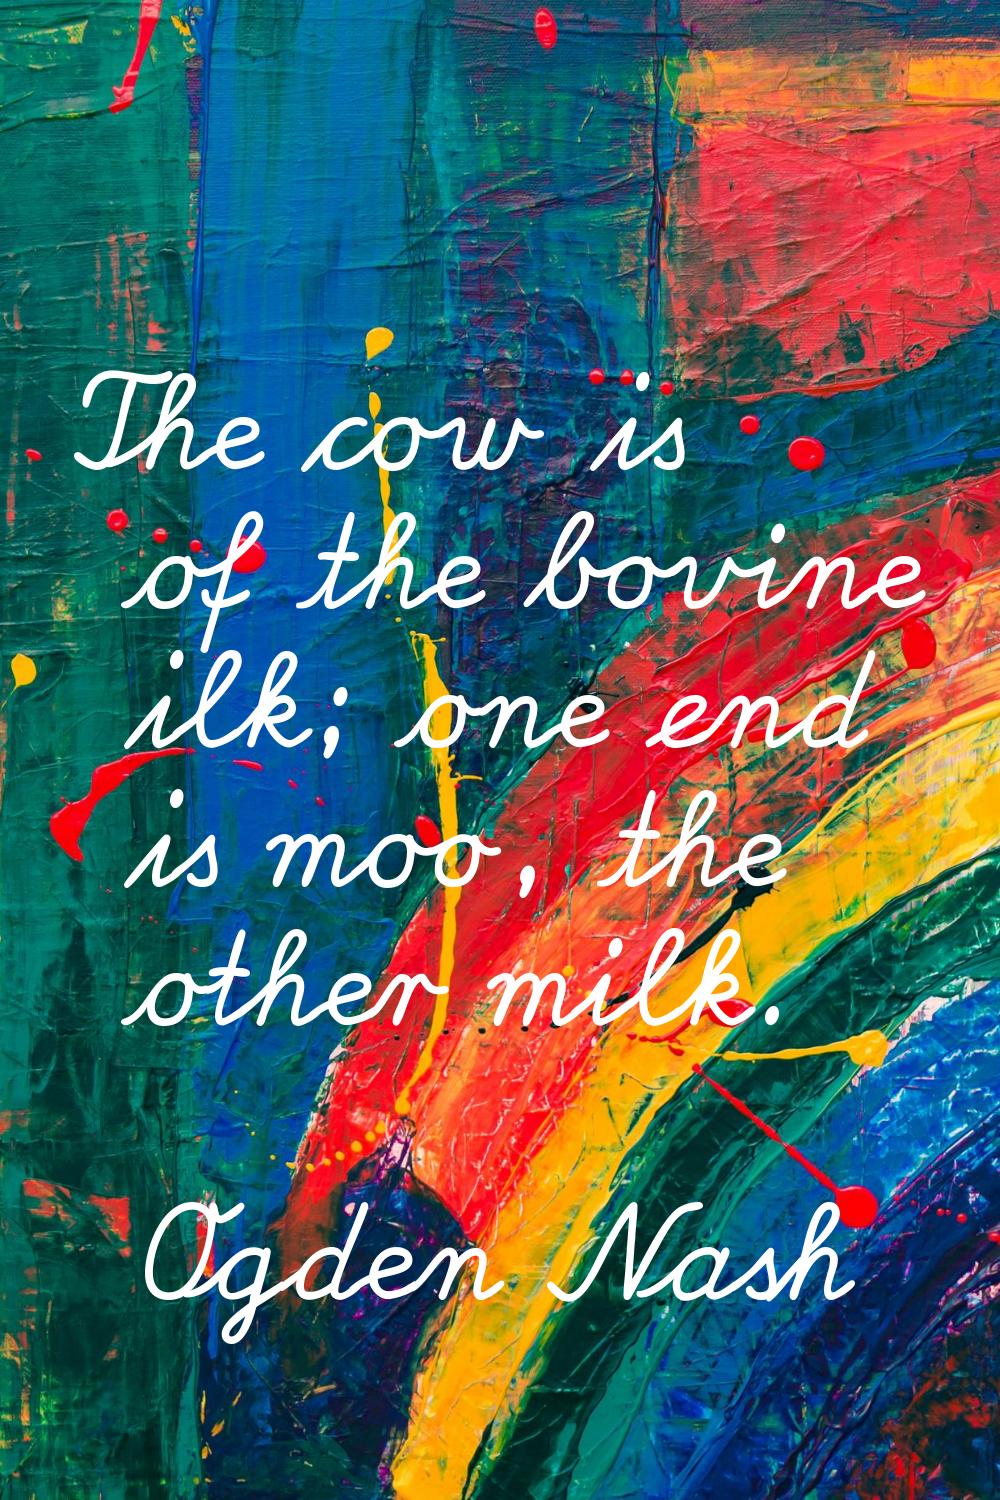 The cow is of the bovine ilk; one end is moo, the other milk.